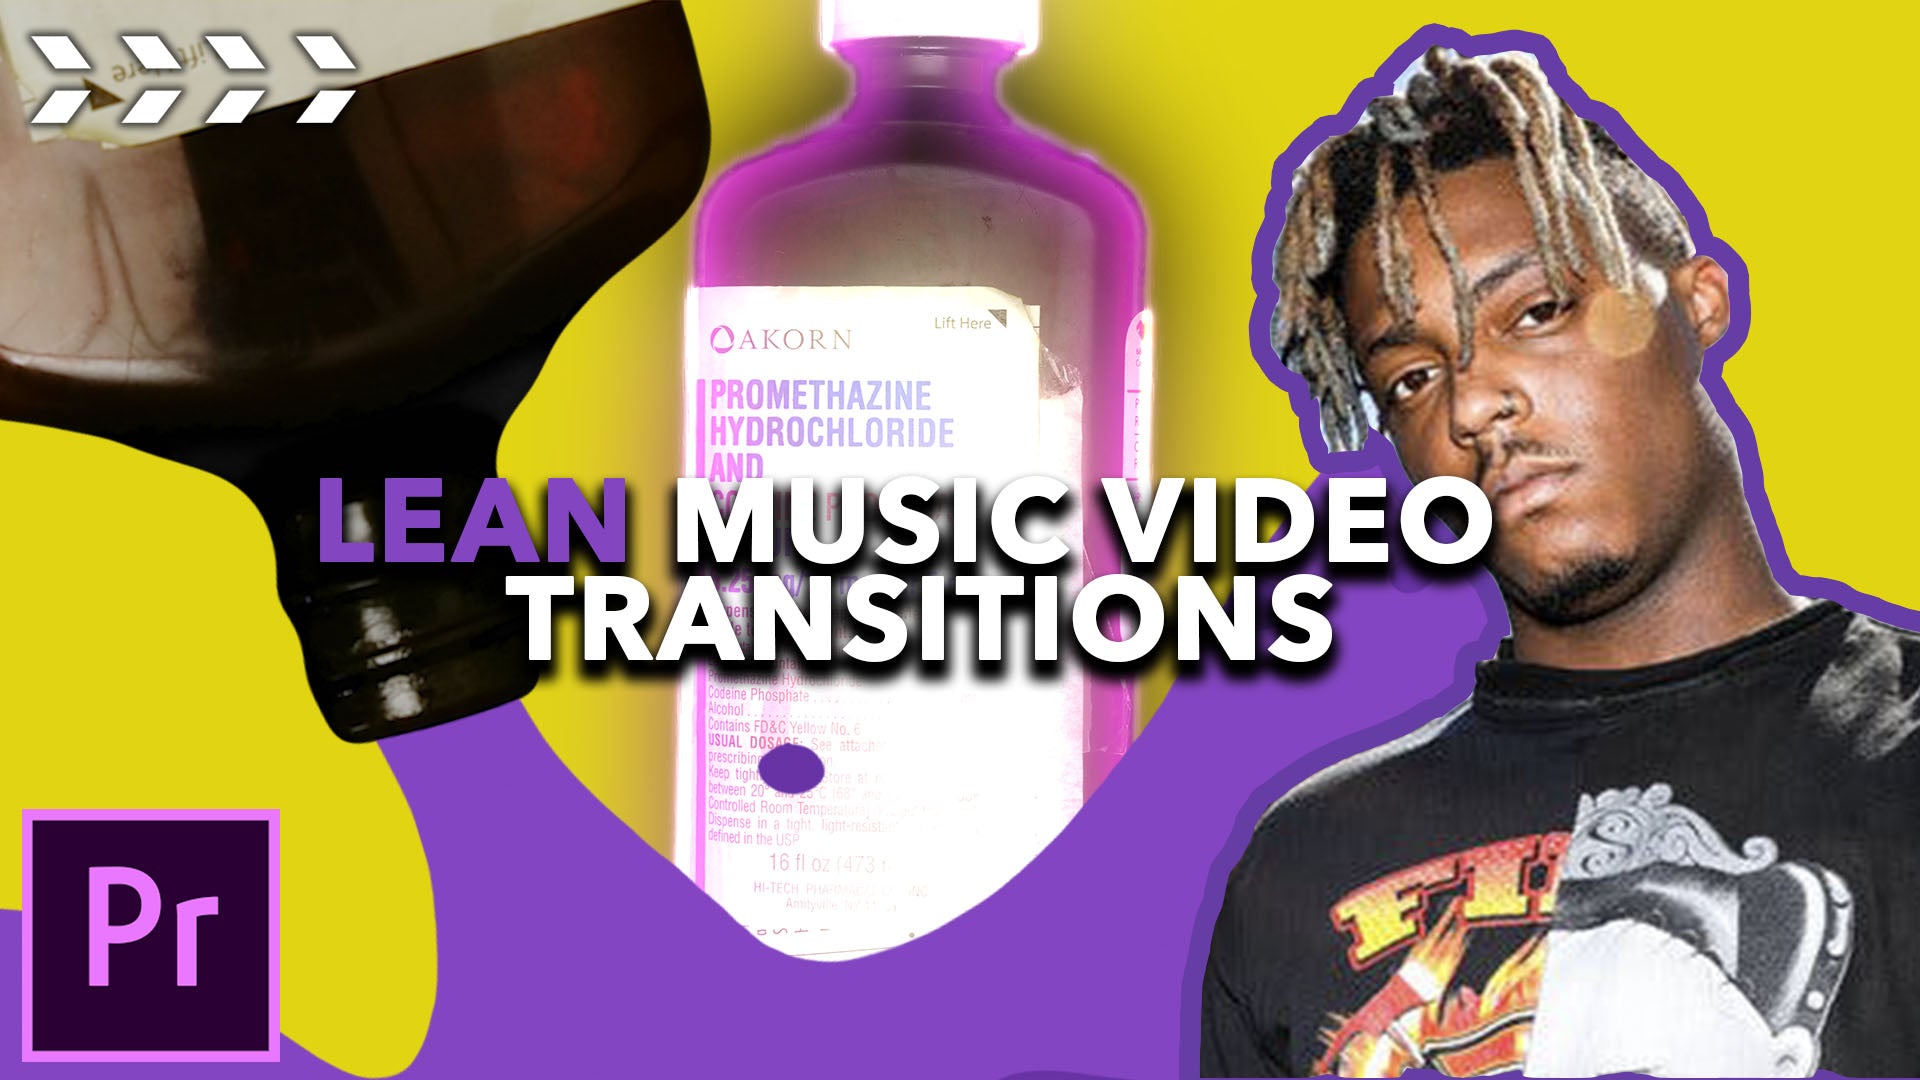 How to Use These Trippy Lean & Pill Effects and Video Transitions in Adobe Premiere Pro